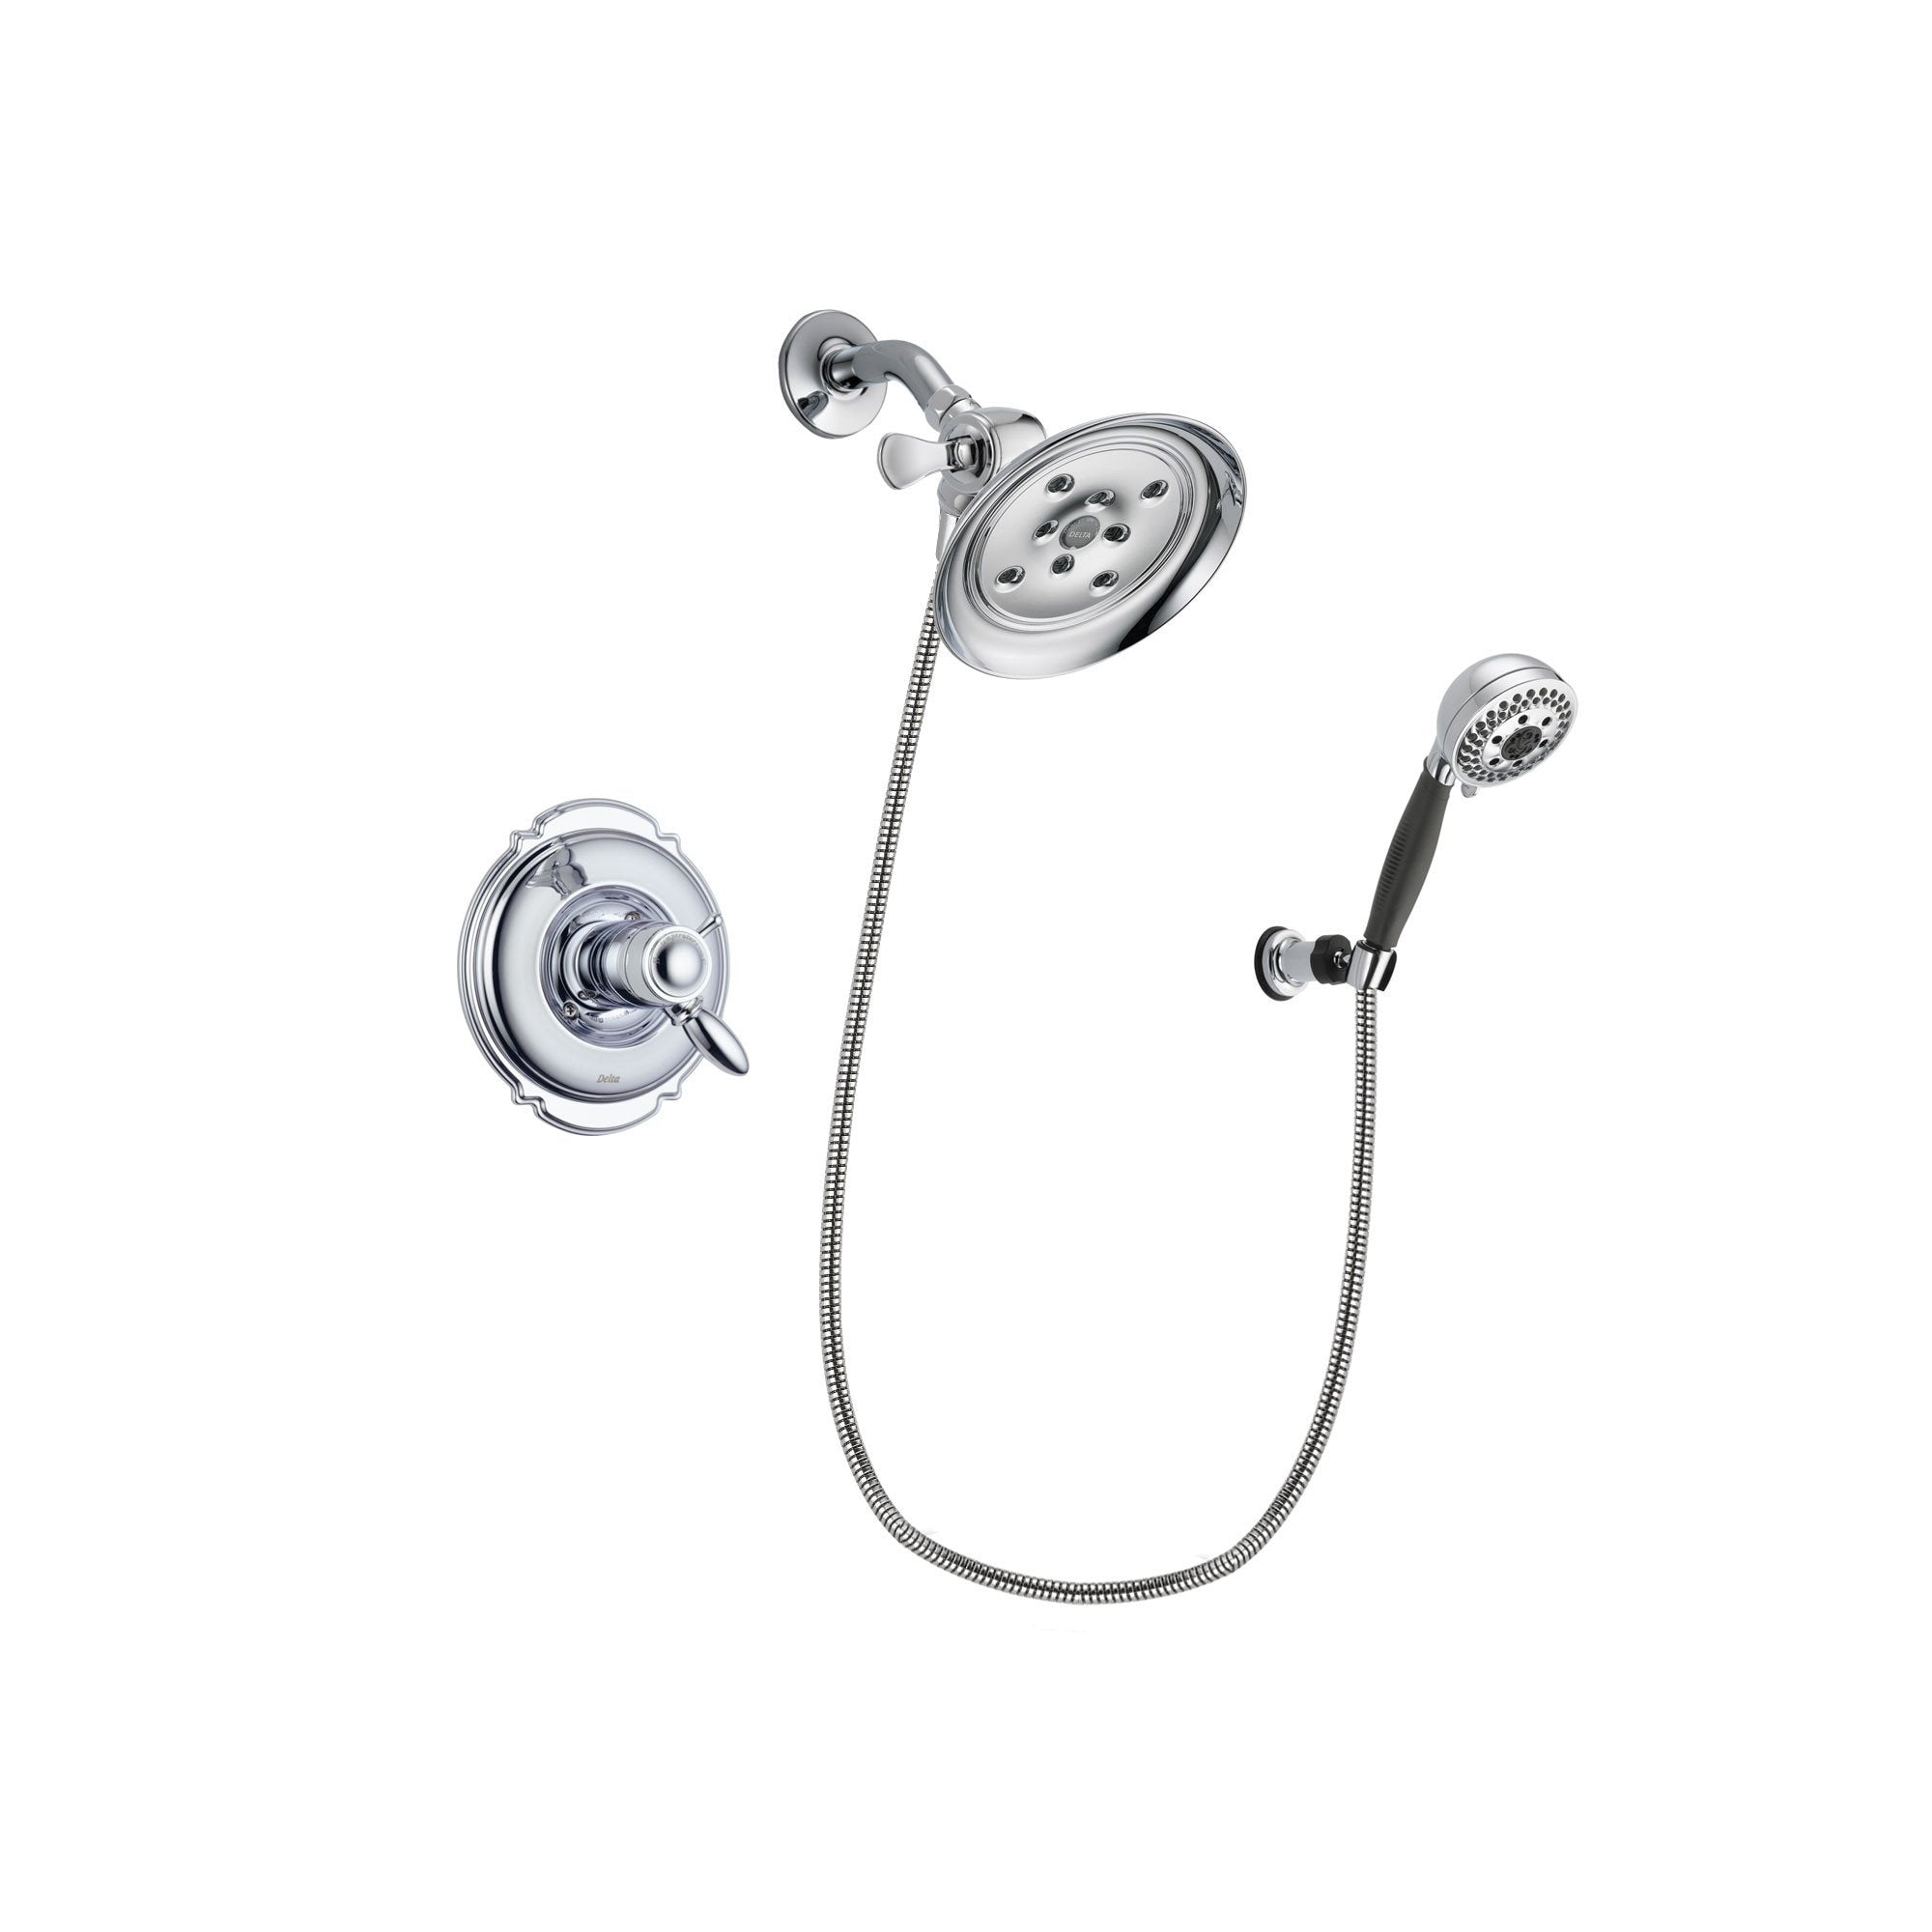 Delta Victorian Chrome Shower Faucet System Package with Hand Shower DSP1176V